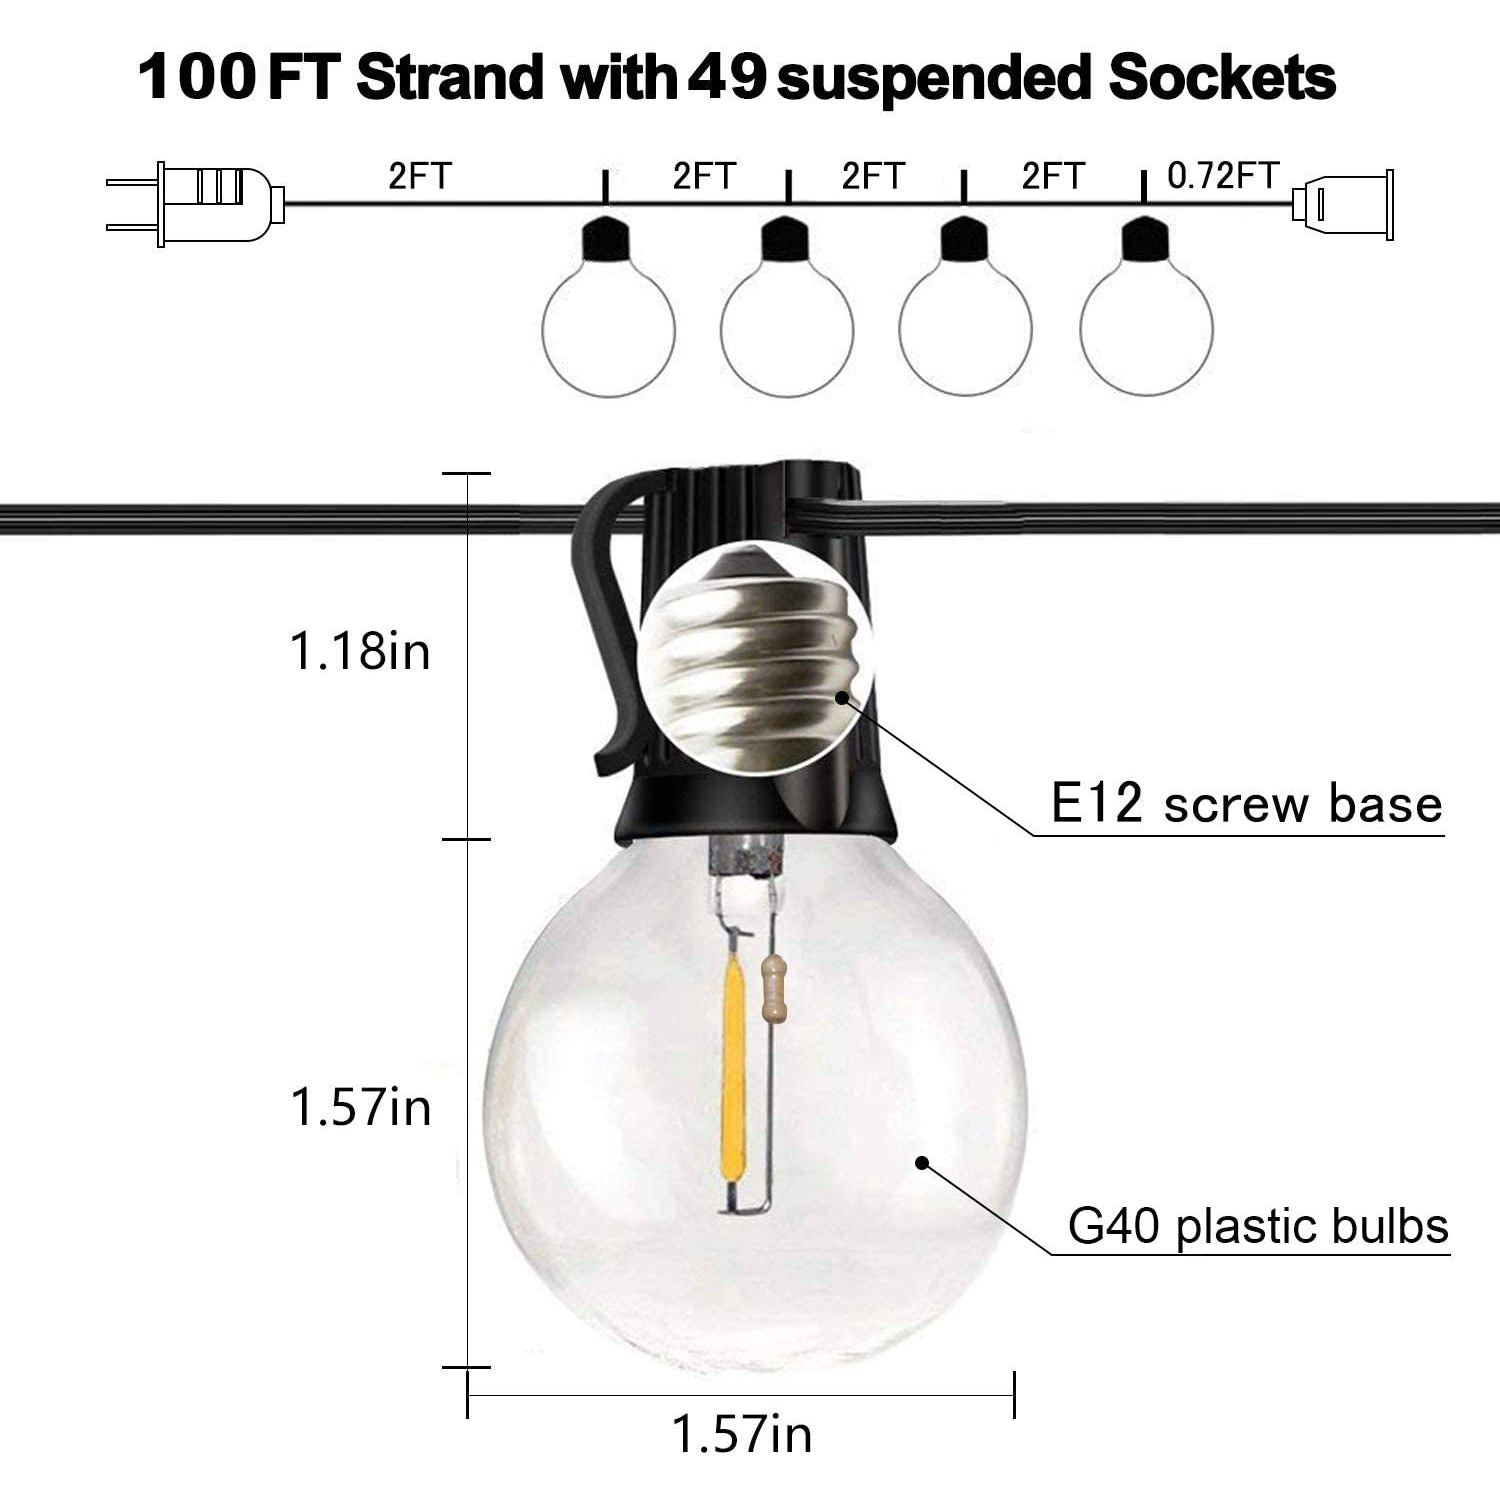 Banord 100FT G40 Globe String Lights, 2700K LED Outdoor Patio Lights String with 50 Dimmable Shatterproof Bulbs, Waterproof Connectable Hanging Lights for Backyard Porch Balcony Party, E12 Socket Base